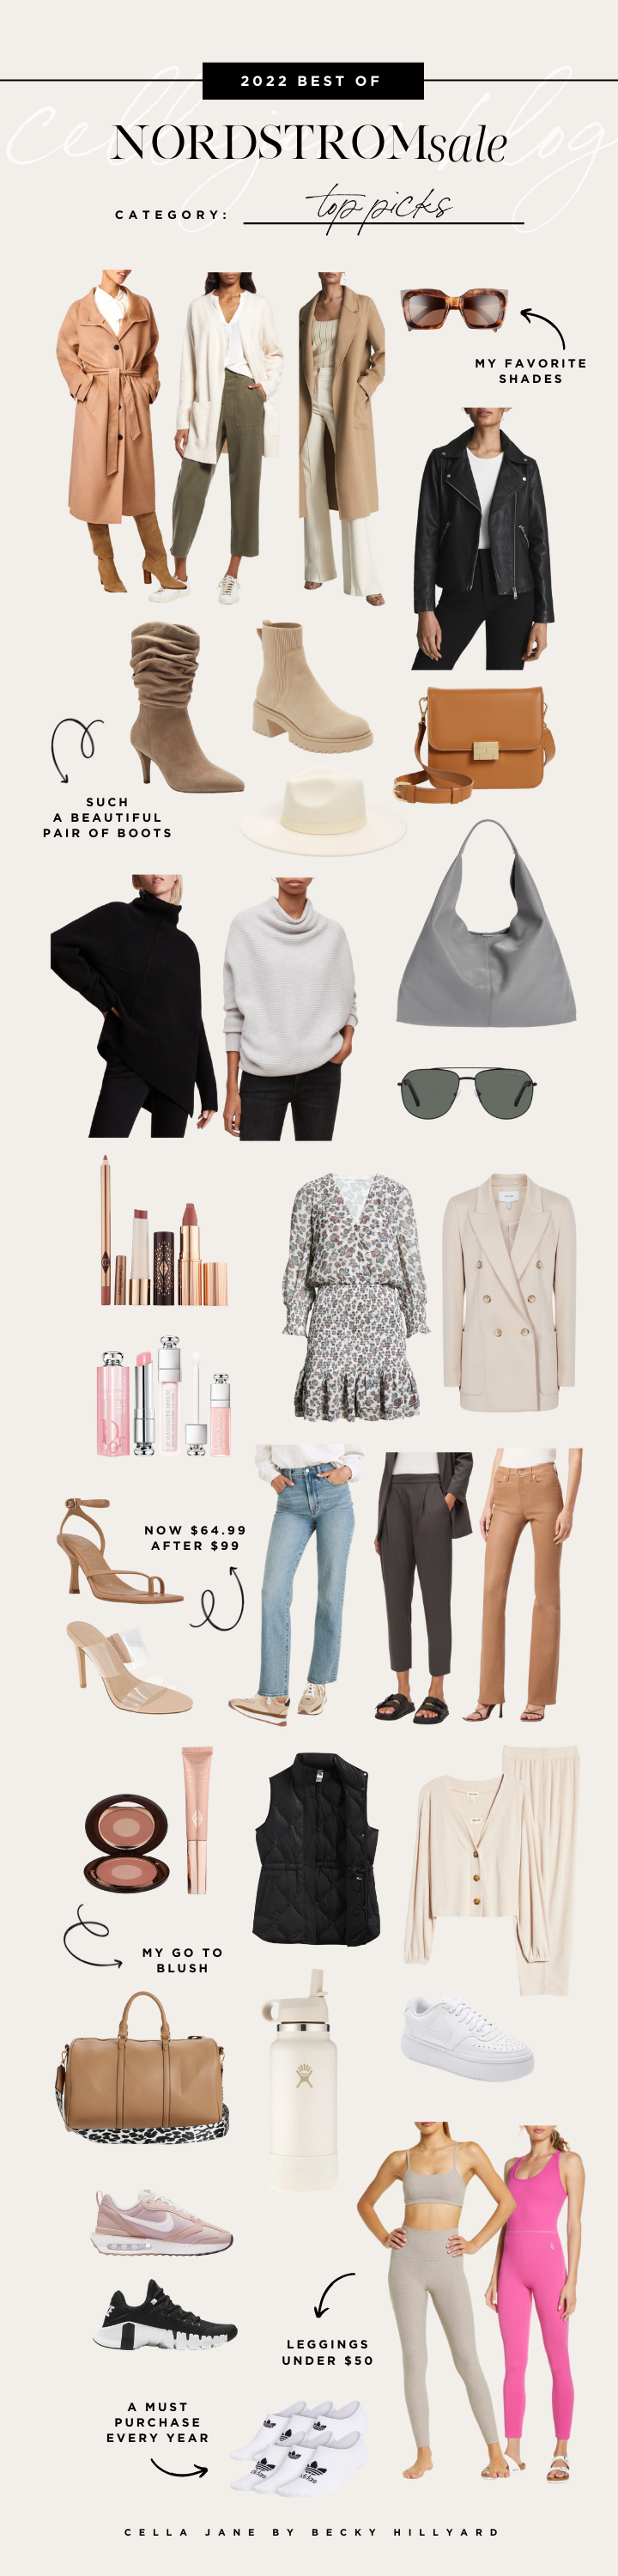 Styled In Cella Jane Collection Nordstrom Exclusives